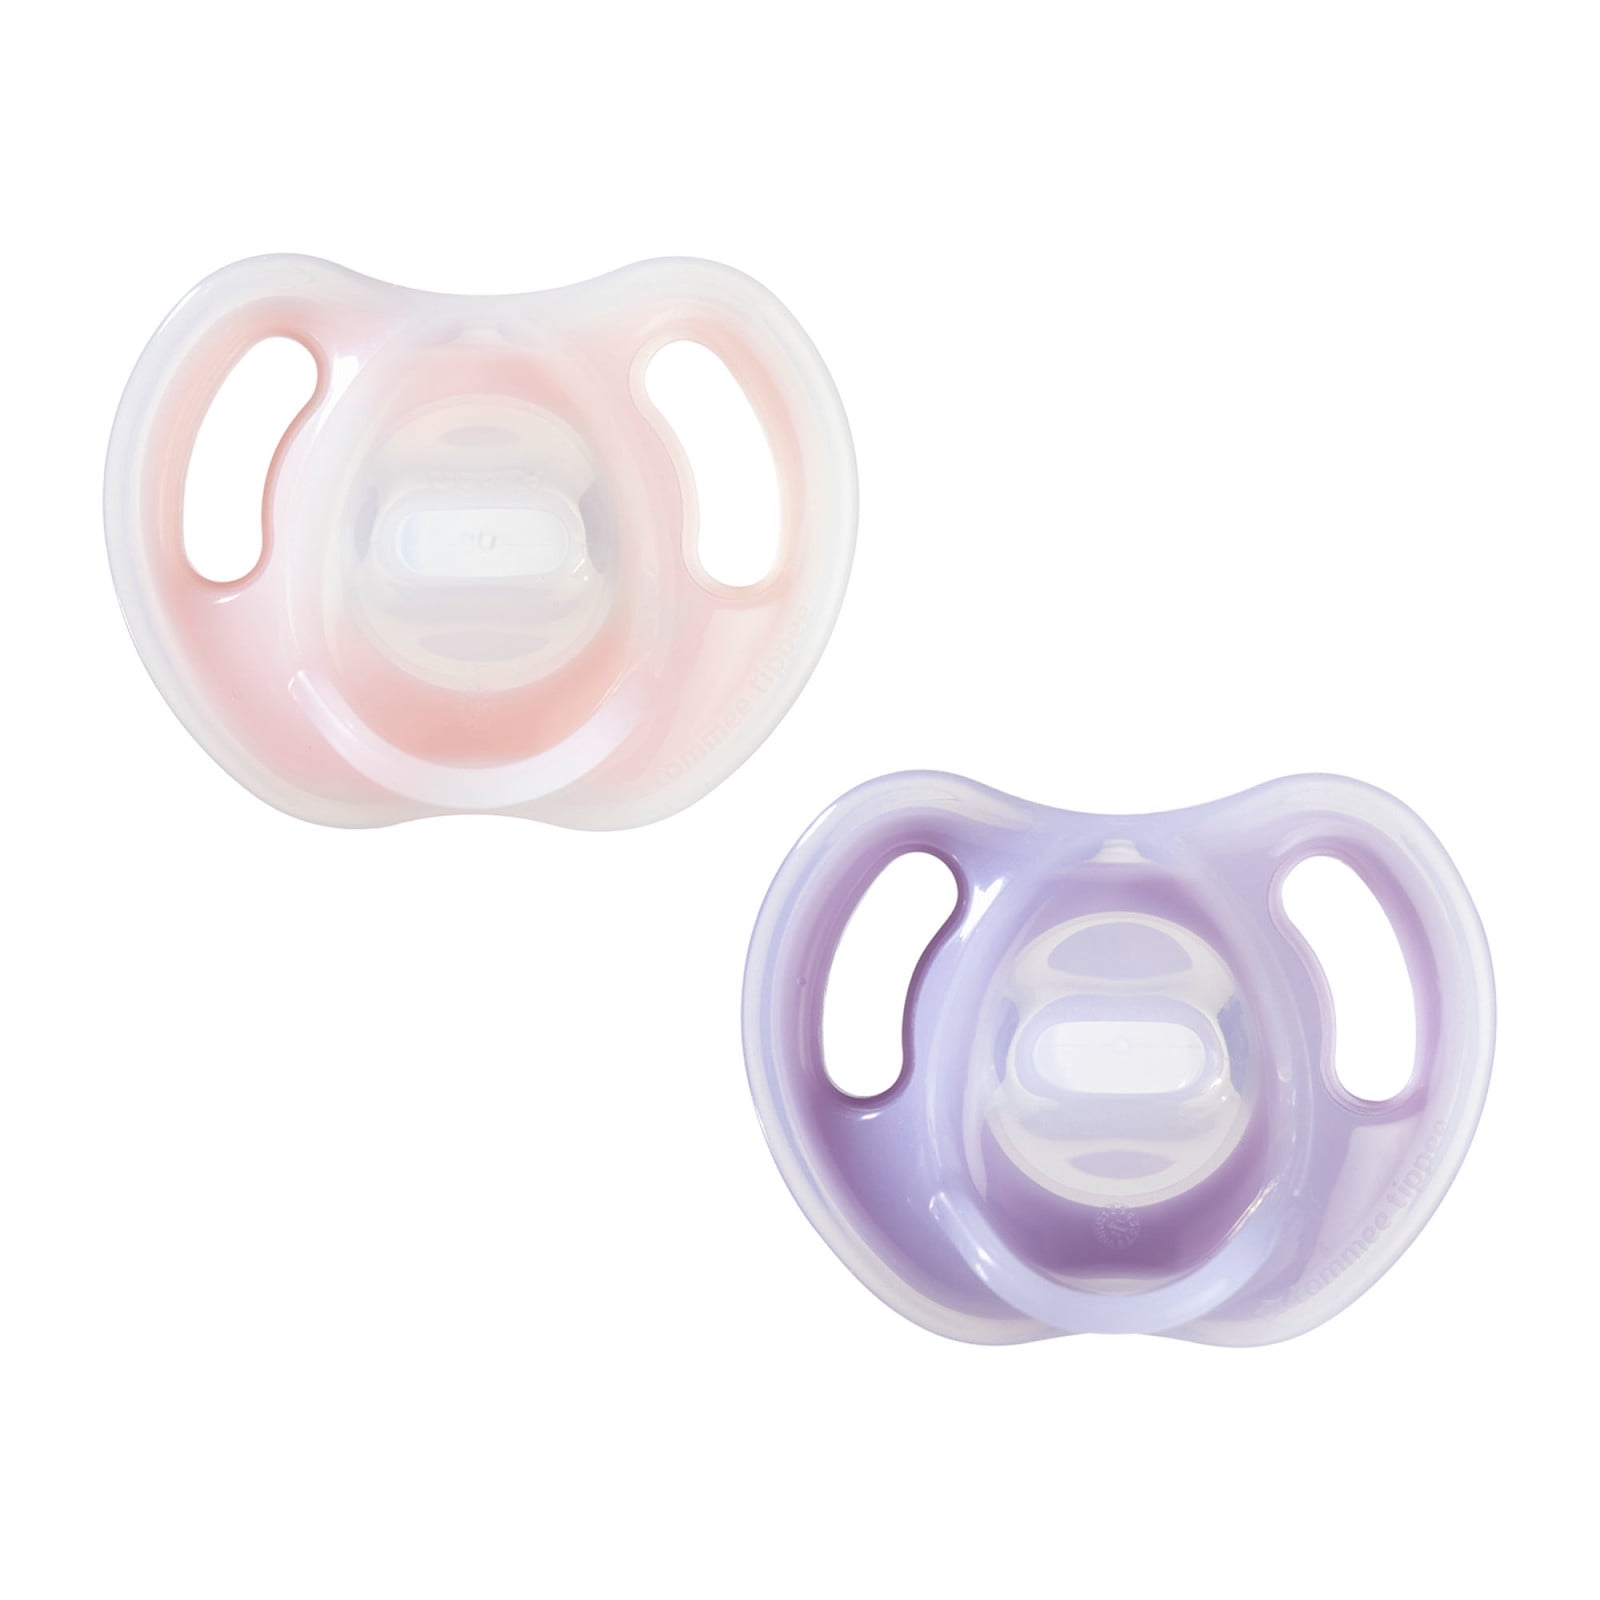 Tommee Tippee Sucette Night 6-18 mois silicone/PP lot de 6